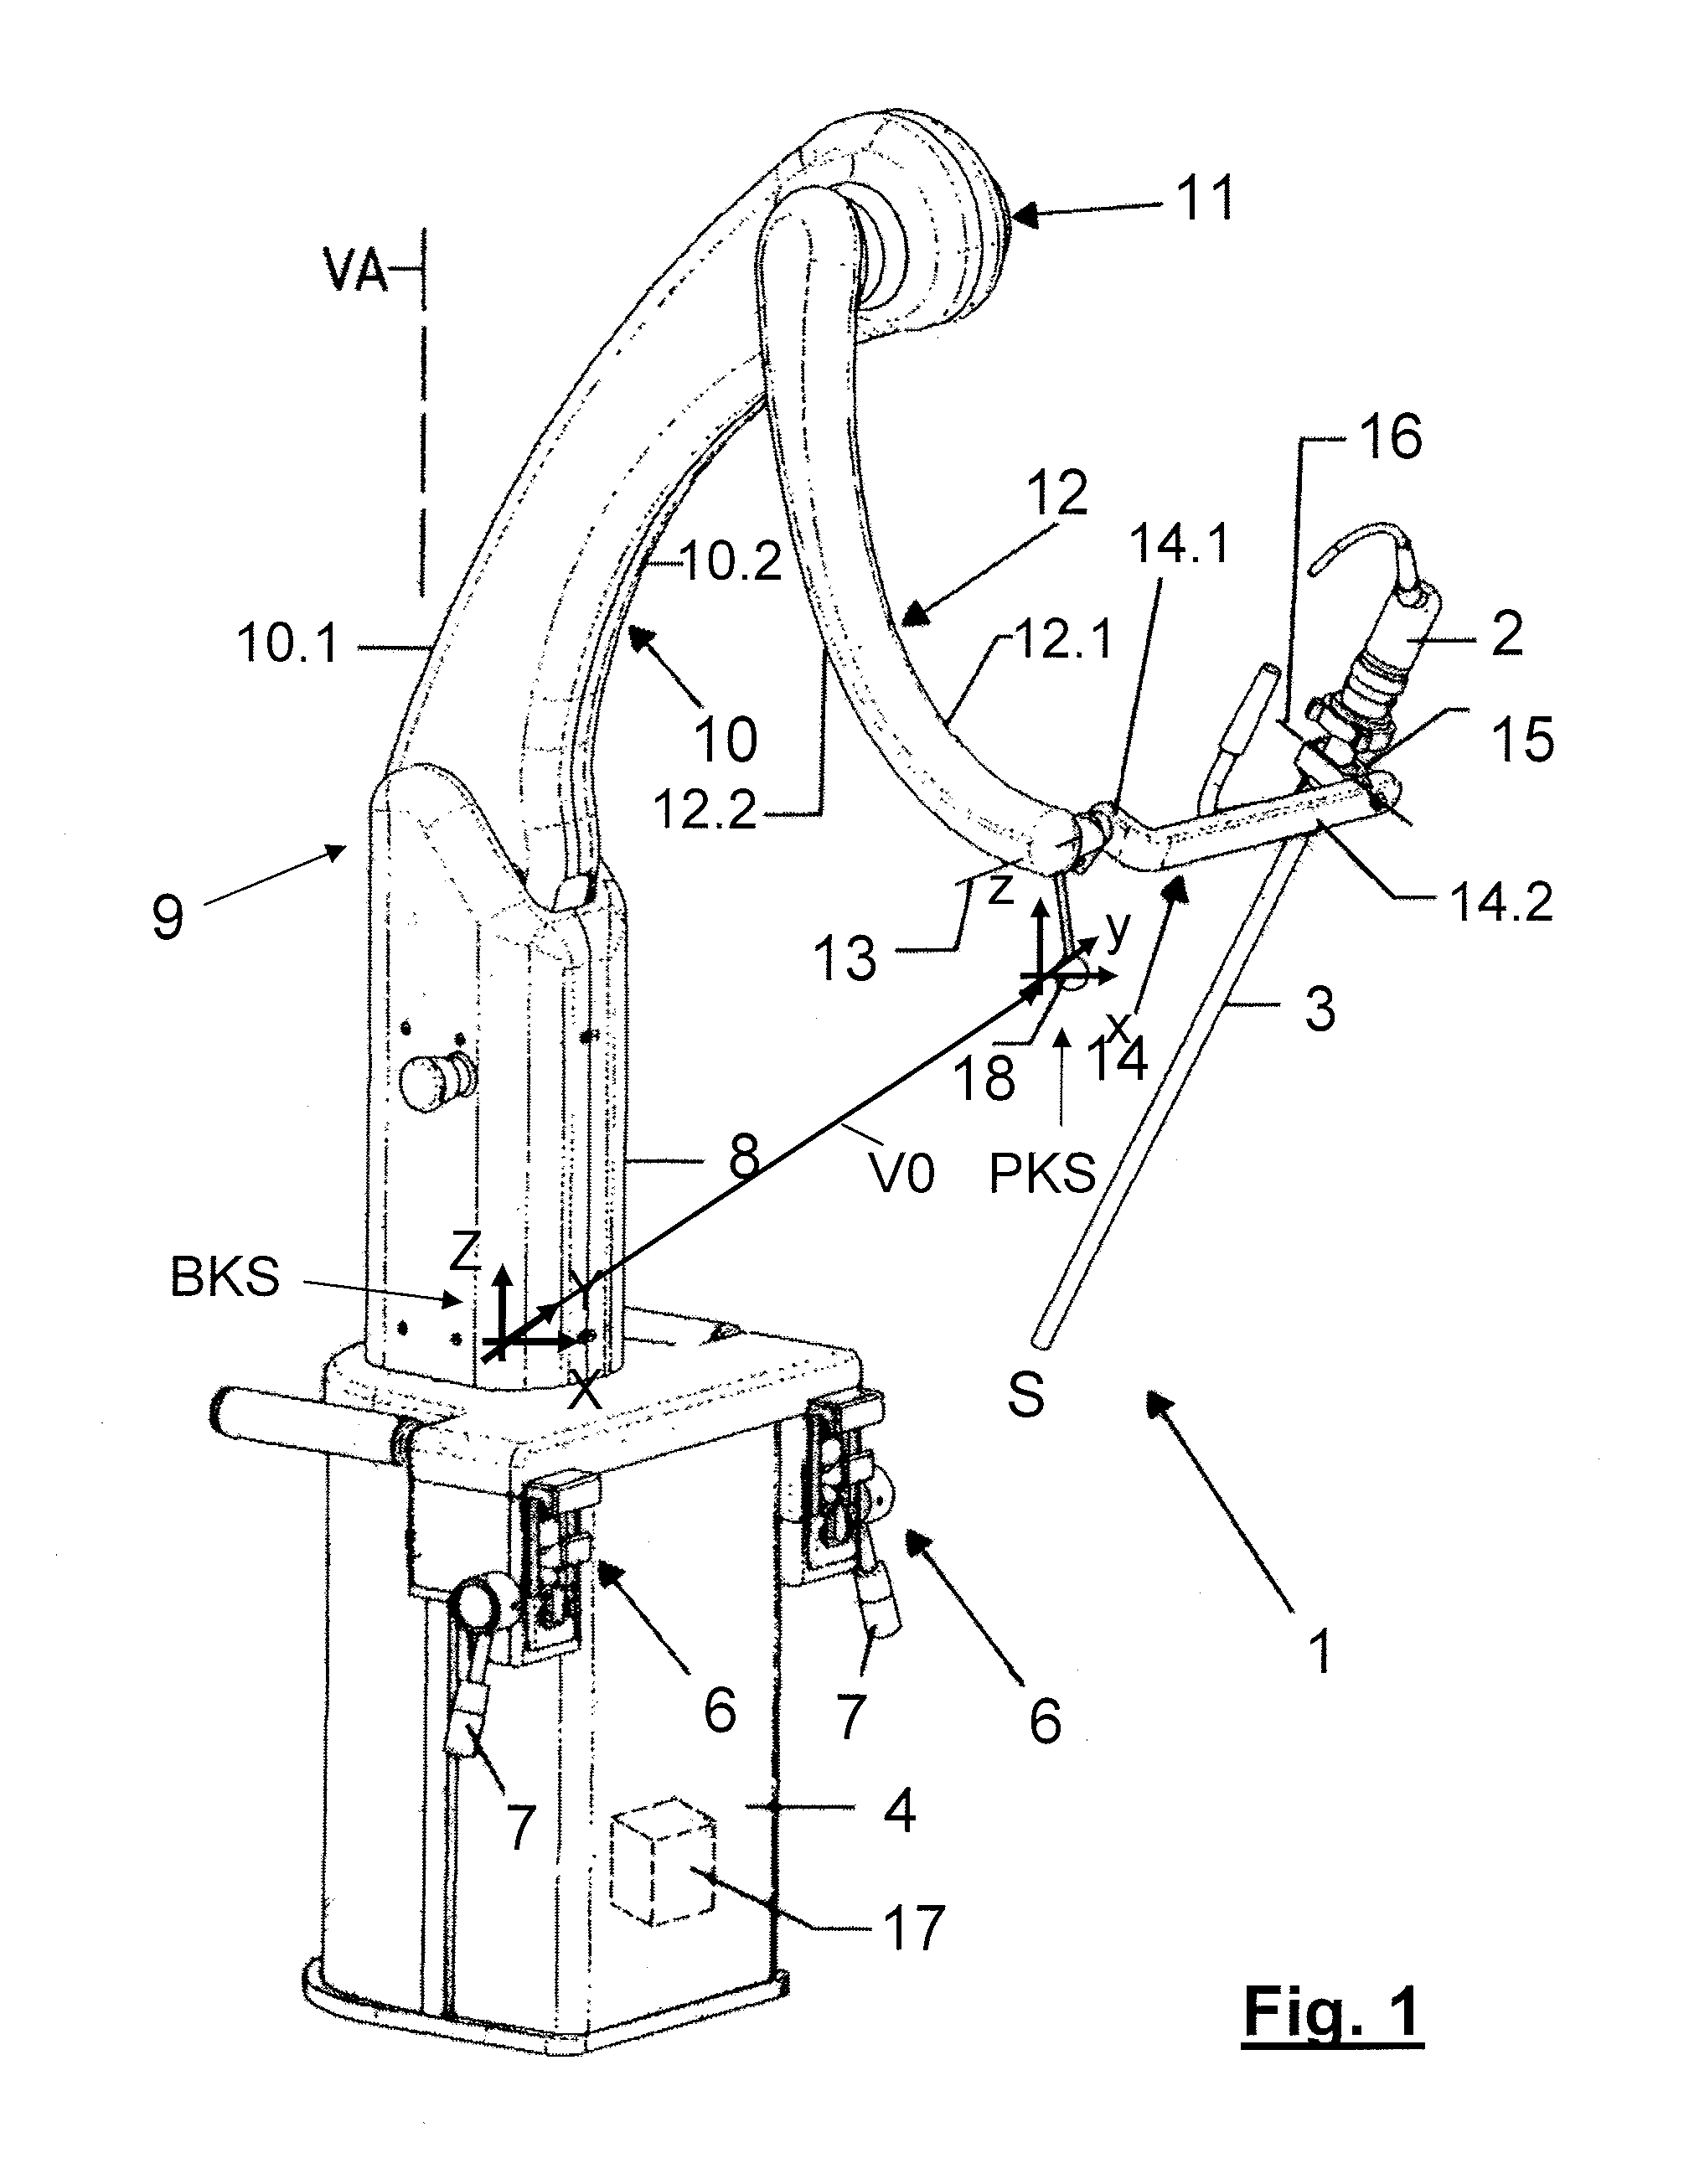 Surgery assistance system for guiding a surgical instrument